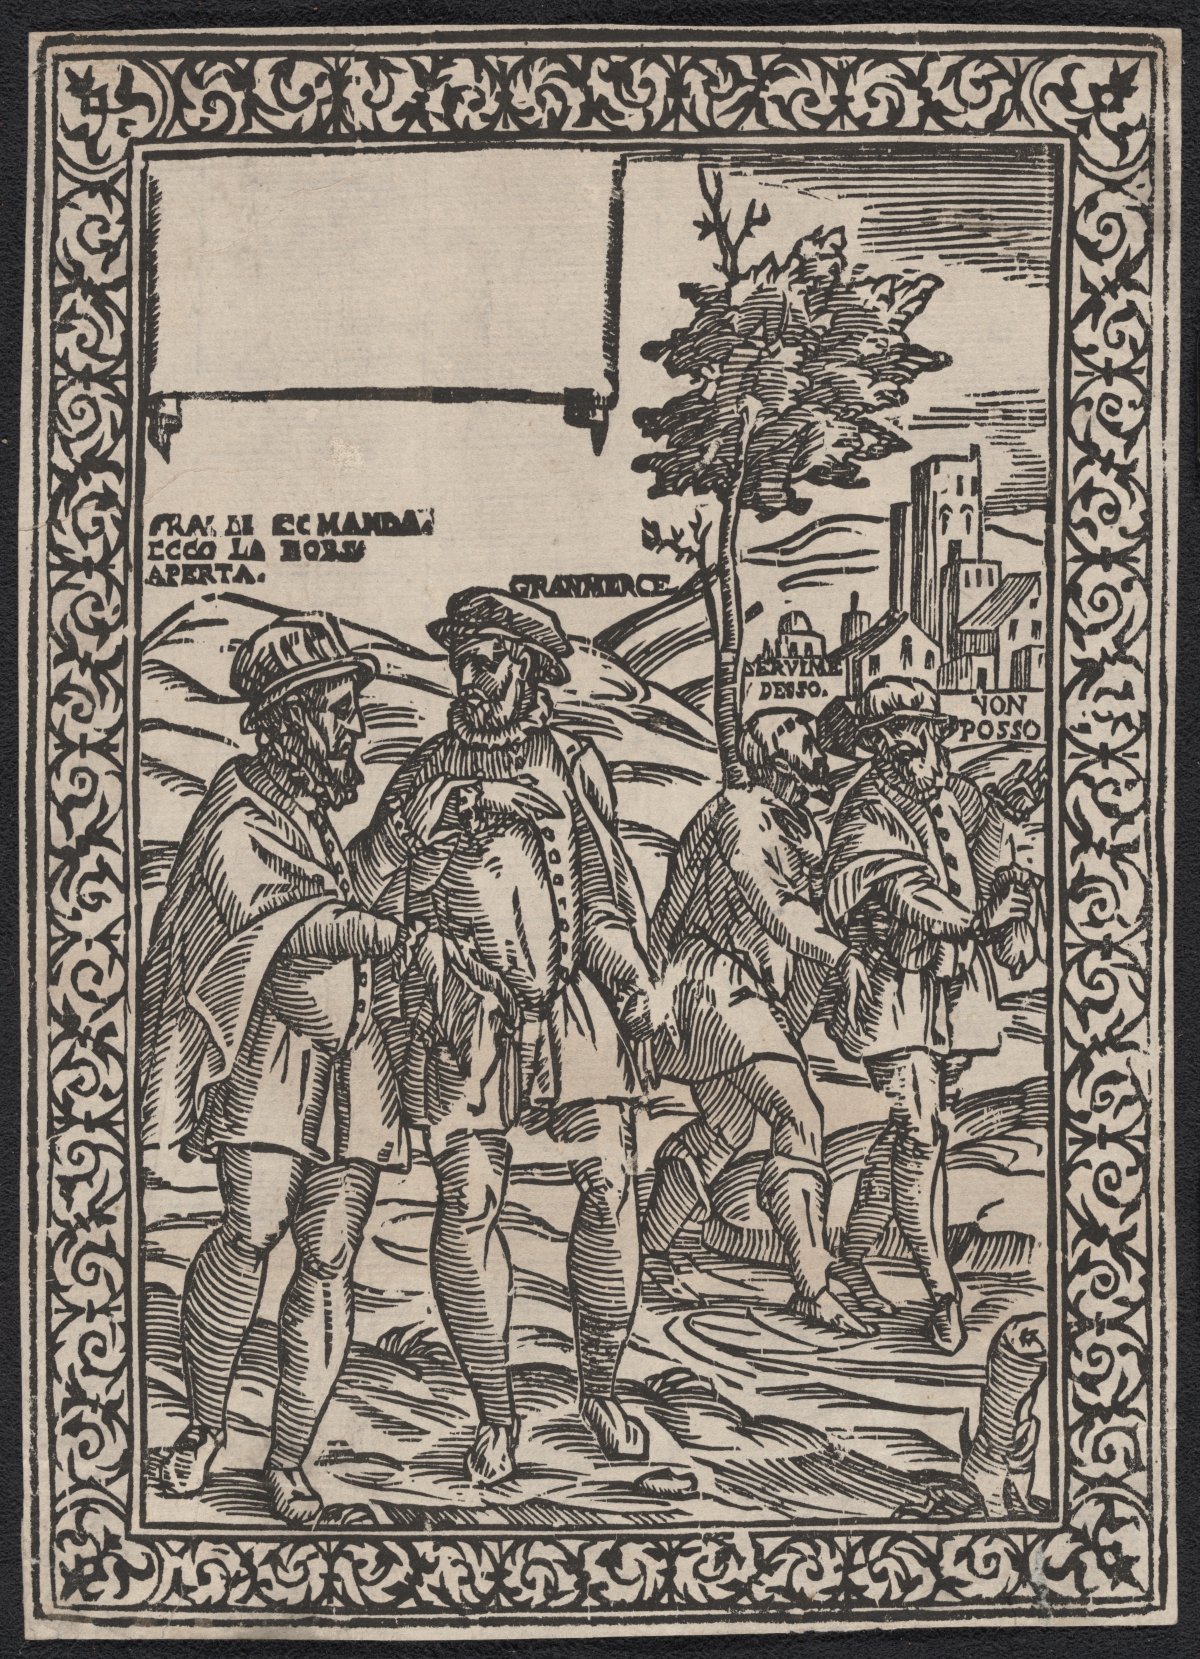 A woodblock print of four men walking across a field in front of a church